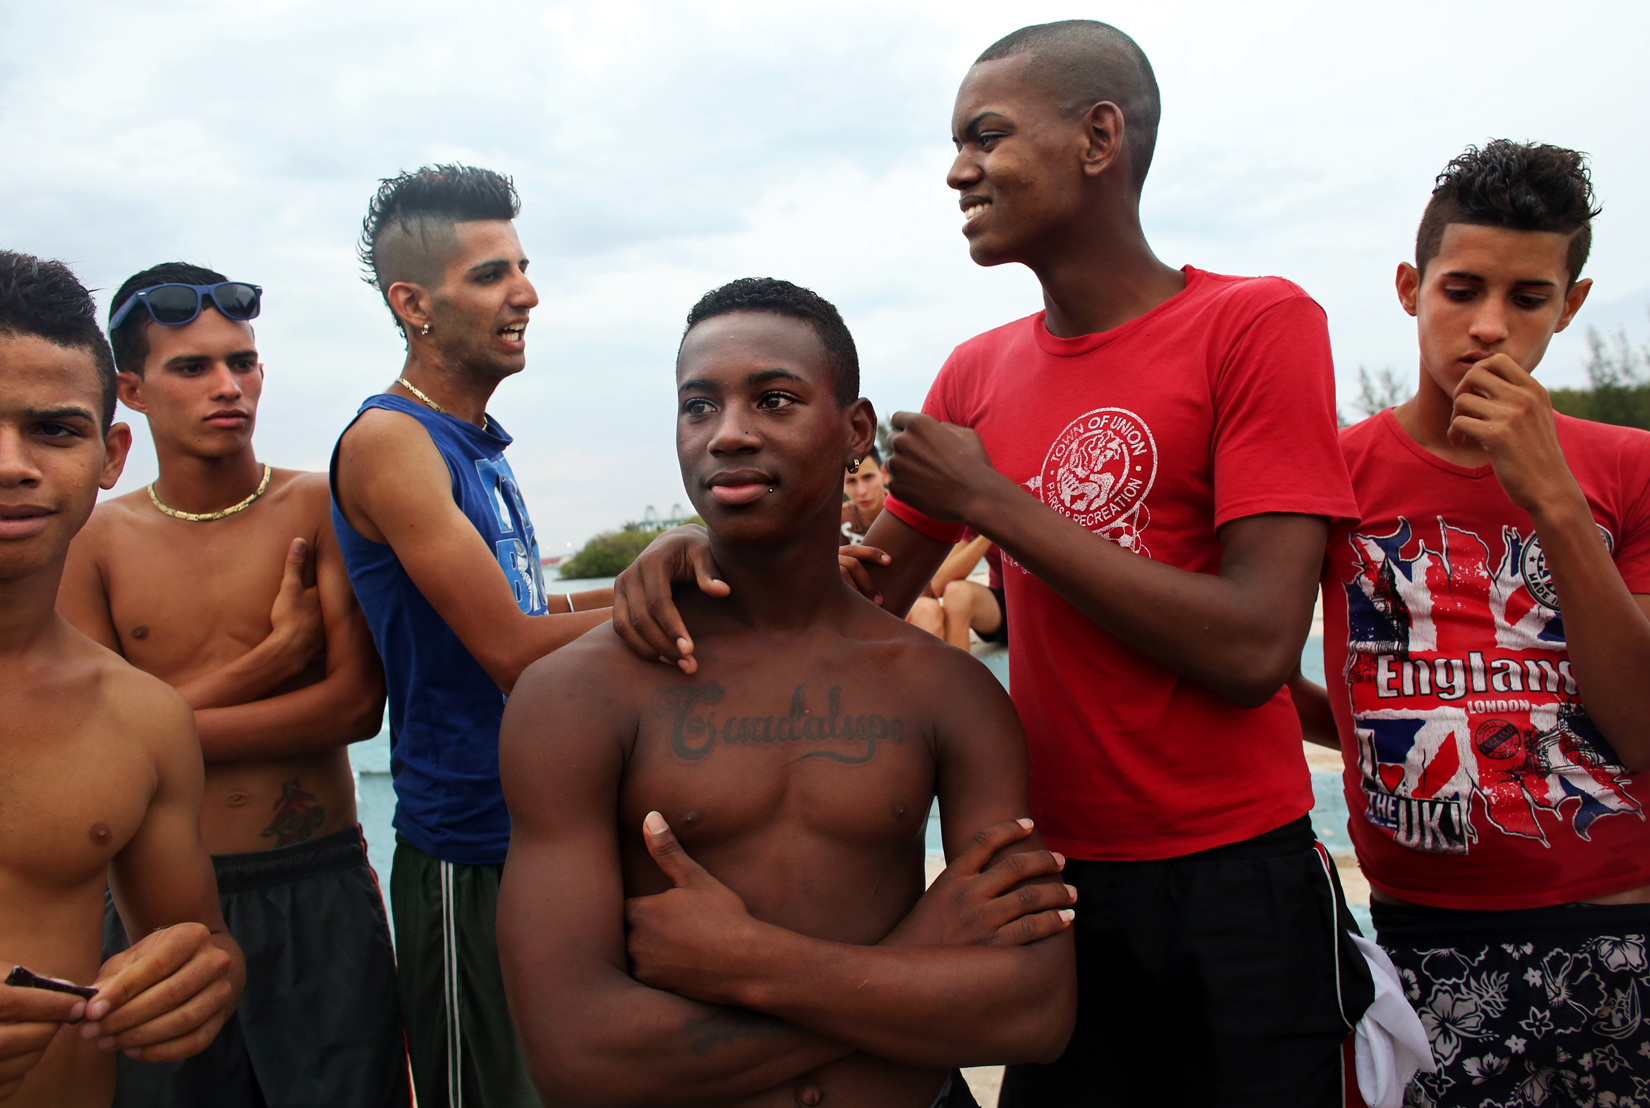 Raymel Medina, 16, (center,) relaxes with friends after an evening dip in the water in the port city of Mariel, Cuba. He says he'd like to learn more about the world, but extremely limited internet access in his city, and in the country in general, makes this a challenge. Internet in Cuba is either difficult to find, or prohibitively expensive. Travel outside of the island is also forbidden to most, except to those whose jobs allows it, or have a government connection.